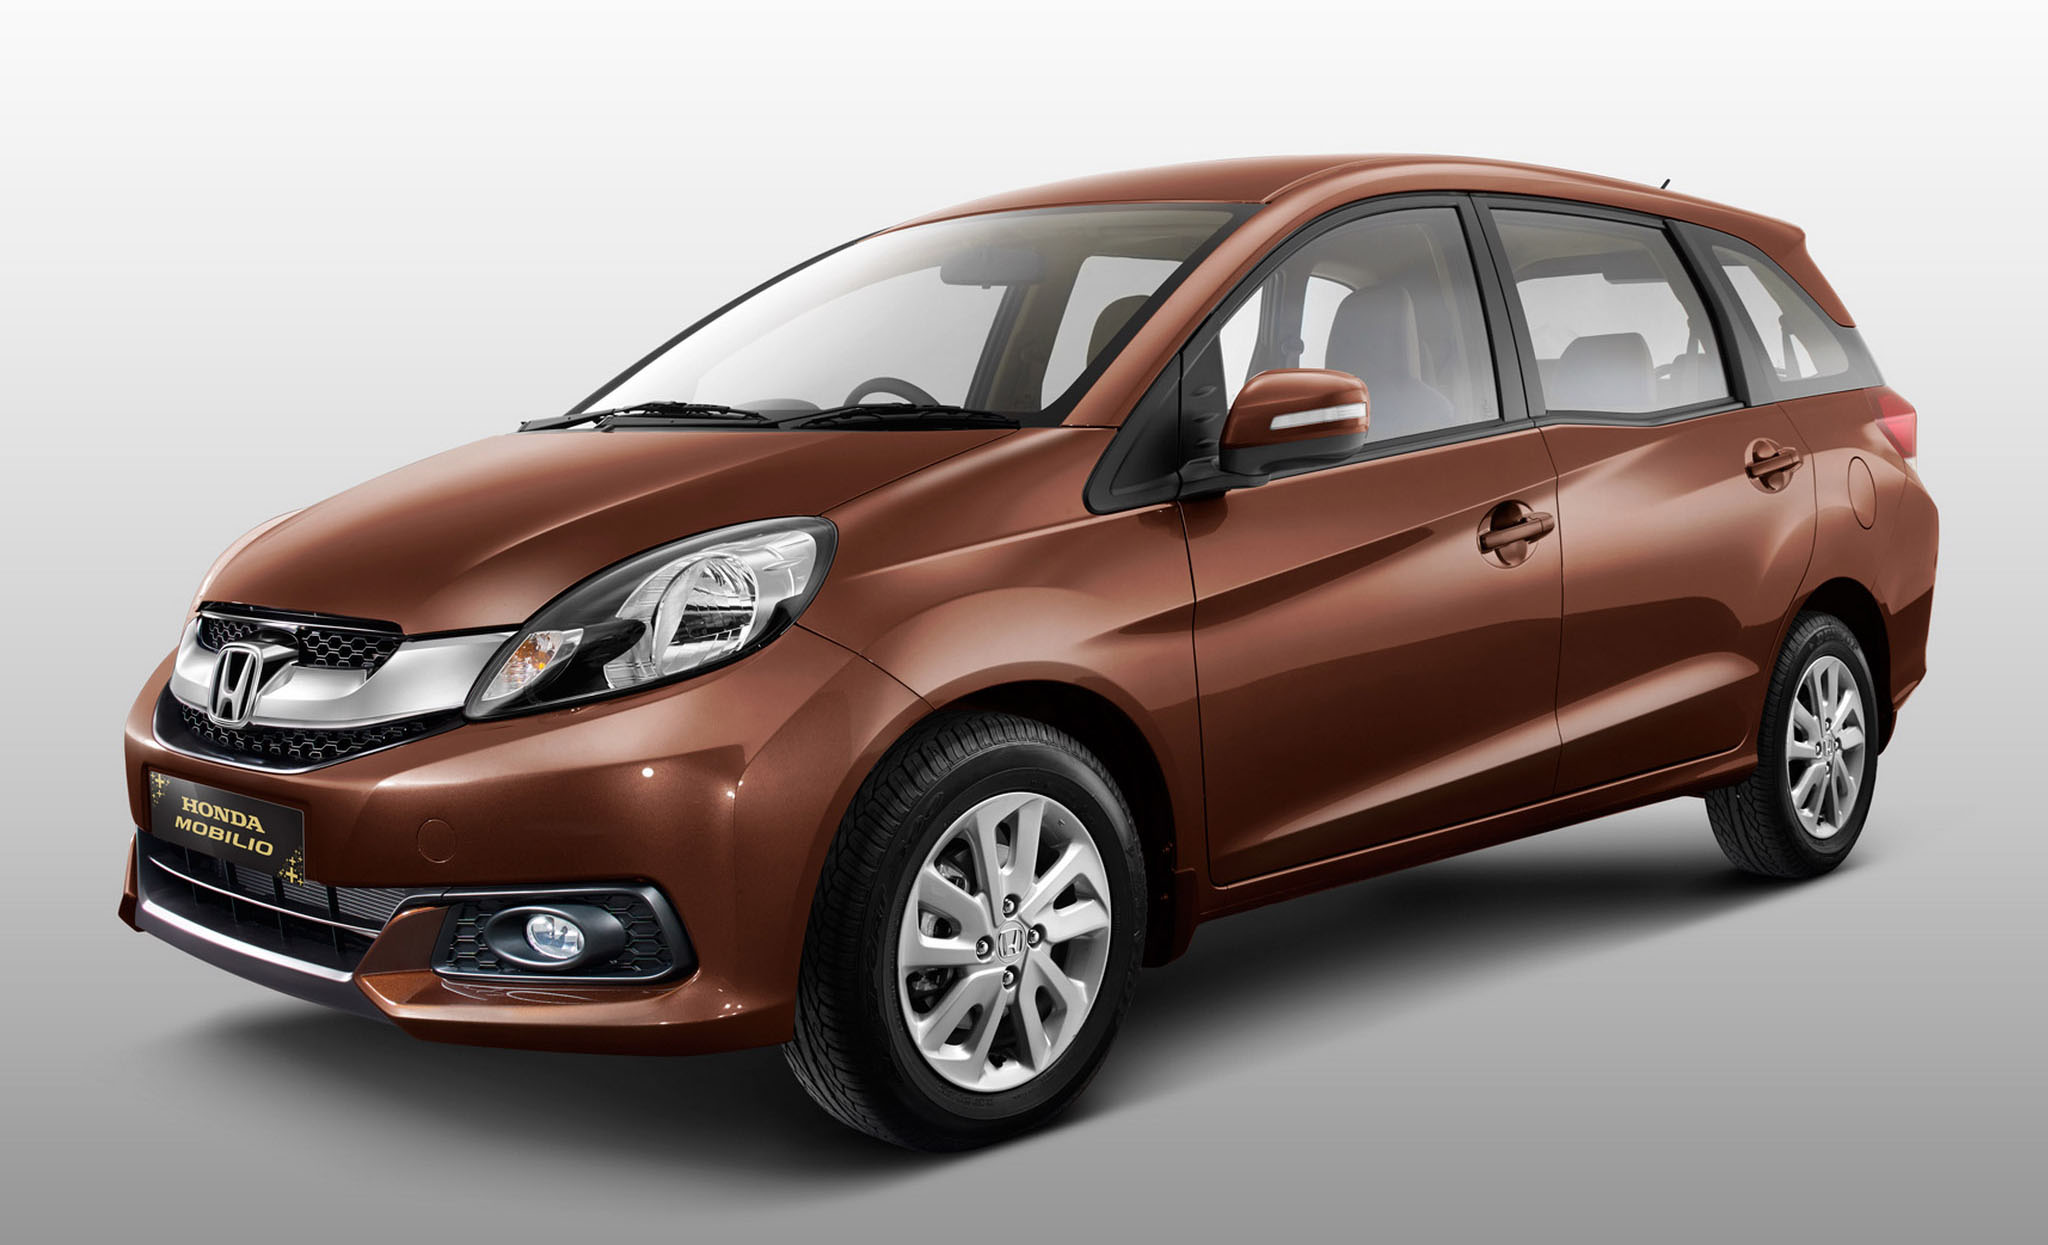 Honda Mobilio discontinued in India - Throttle Blips